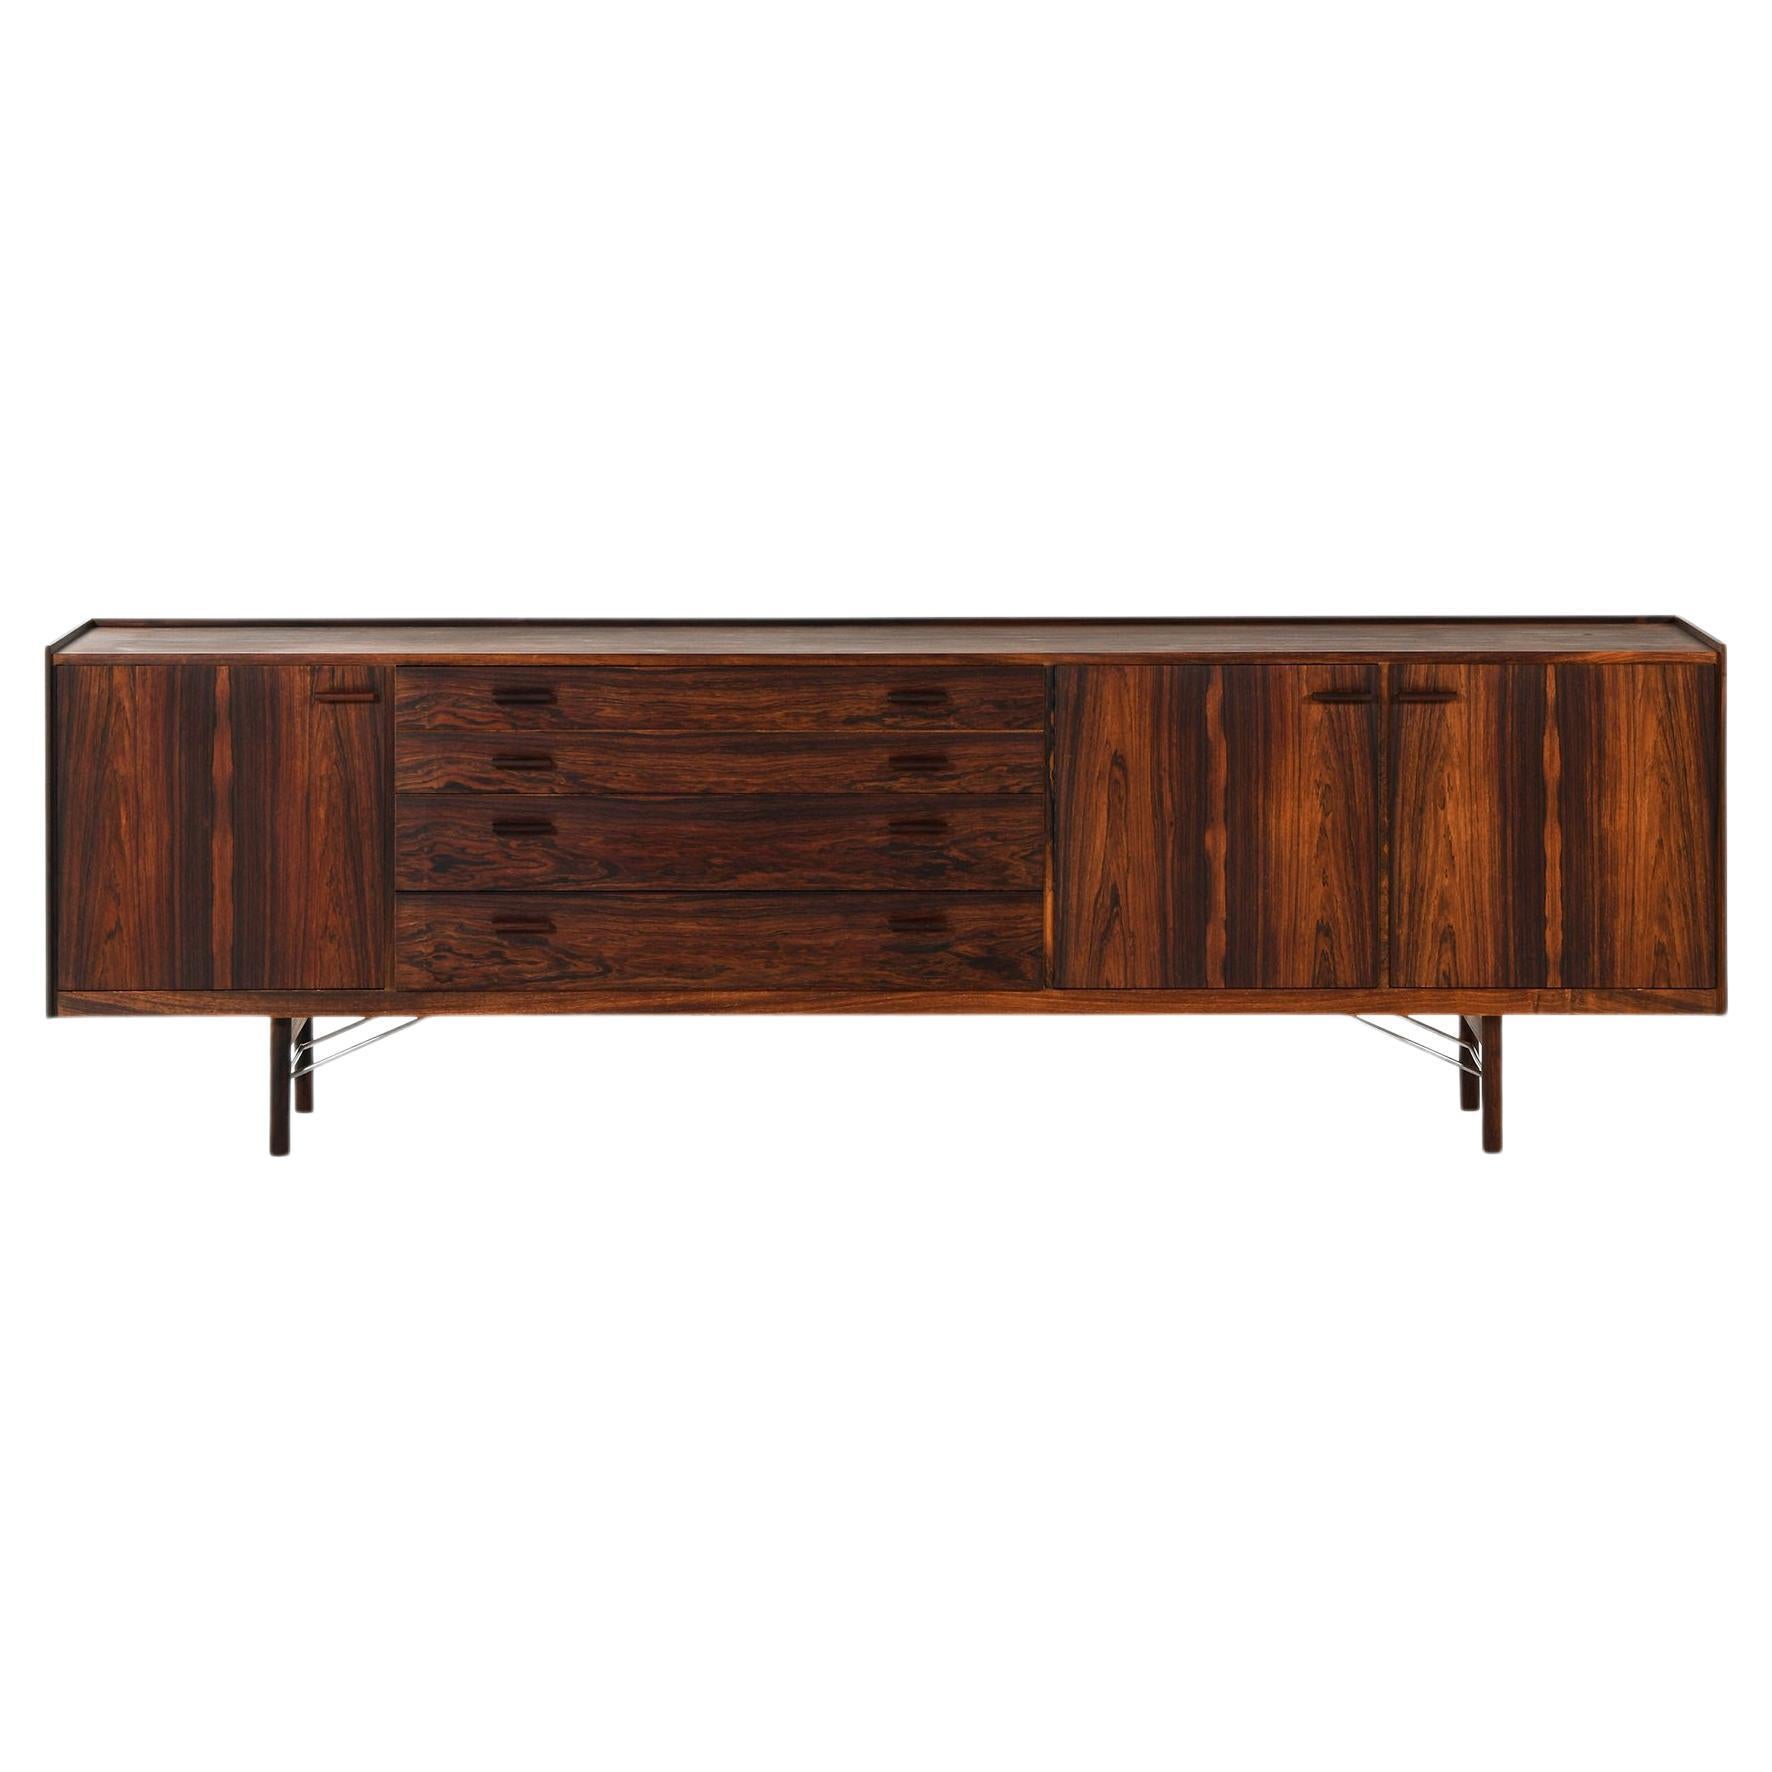 Sideboard in Rosewood and Steel by Ib Kofod-Larsen, 1960s